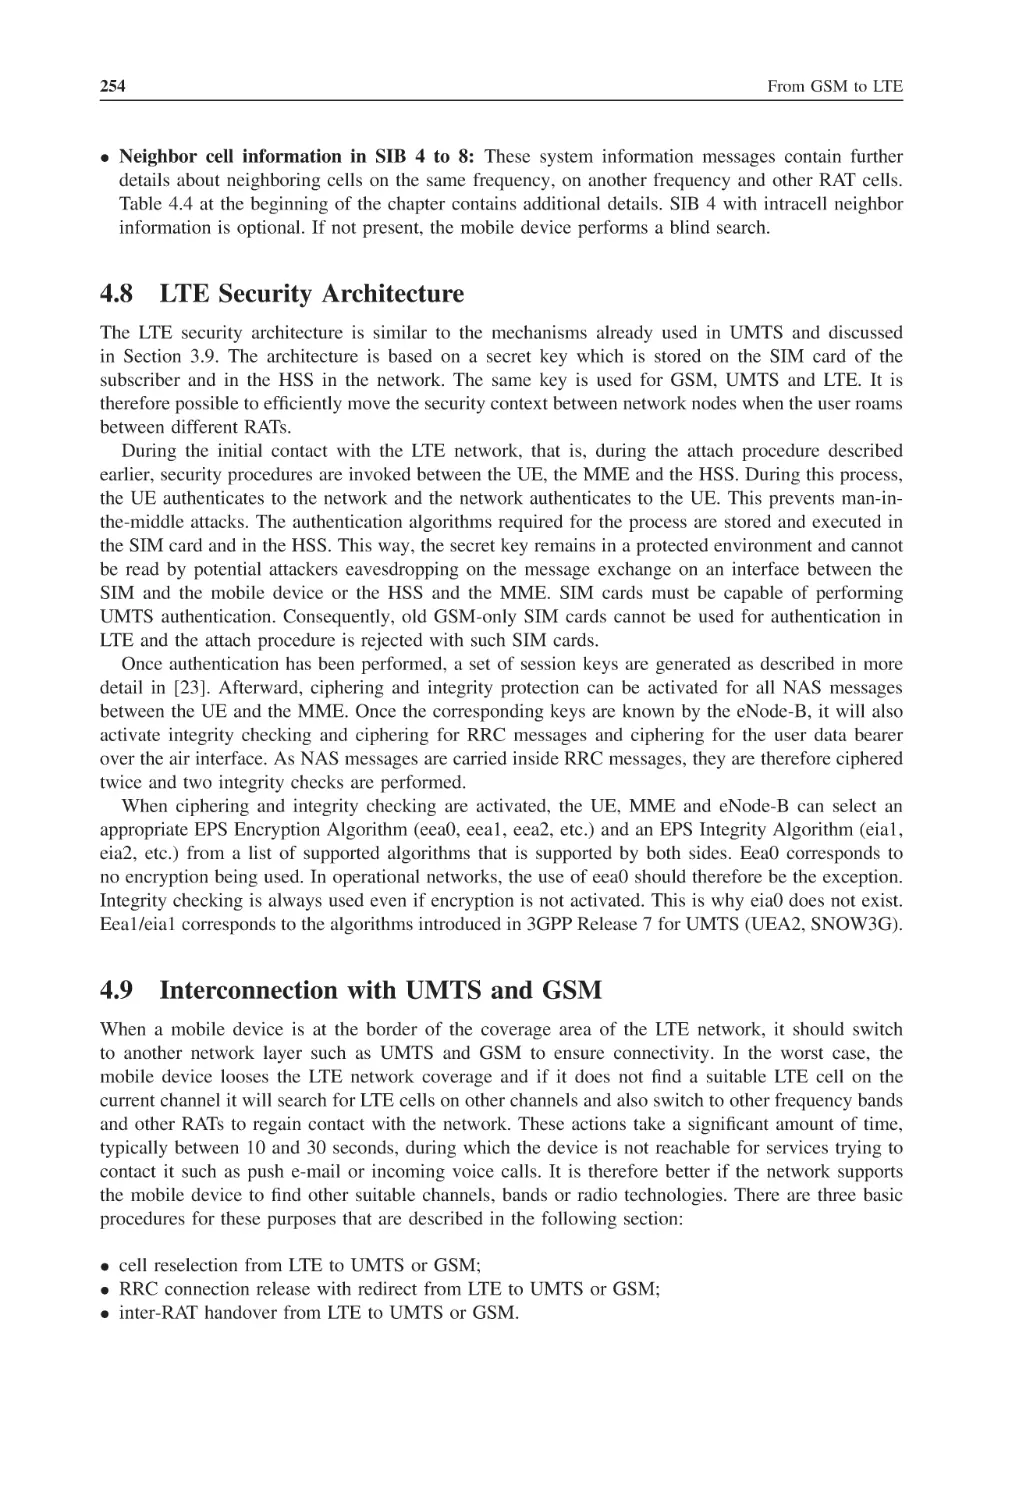 4.8 LTE Security Architecture
4.9 Interconnection with UMTS and GSM